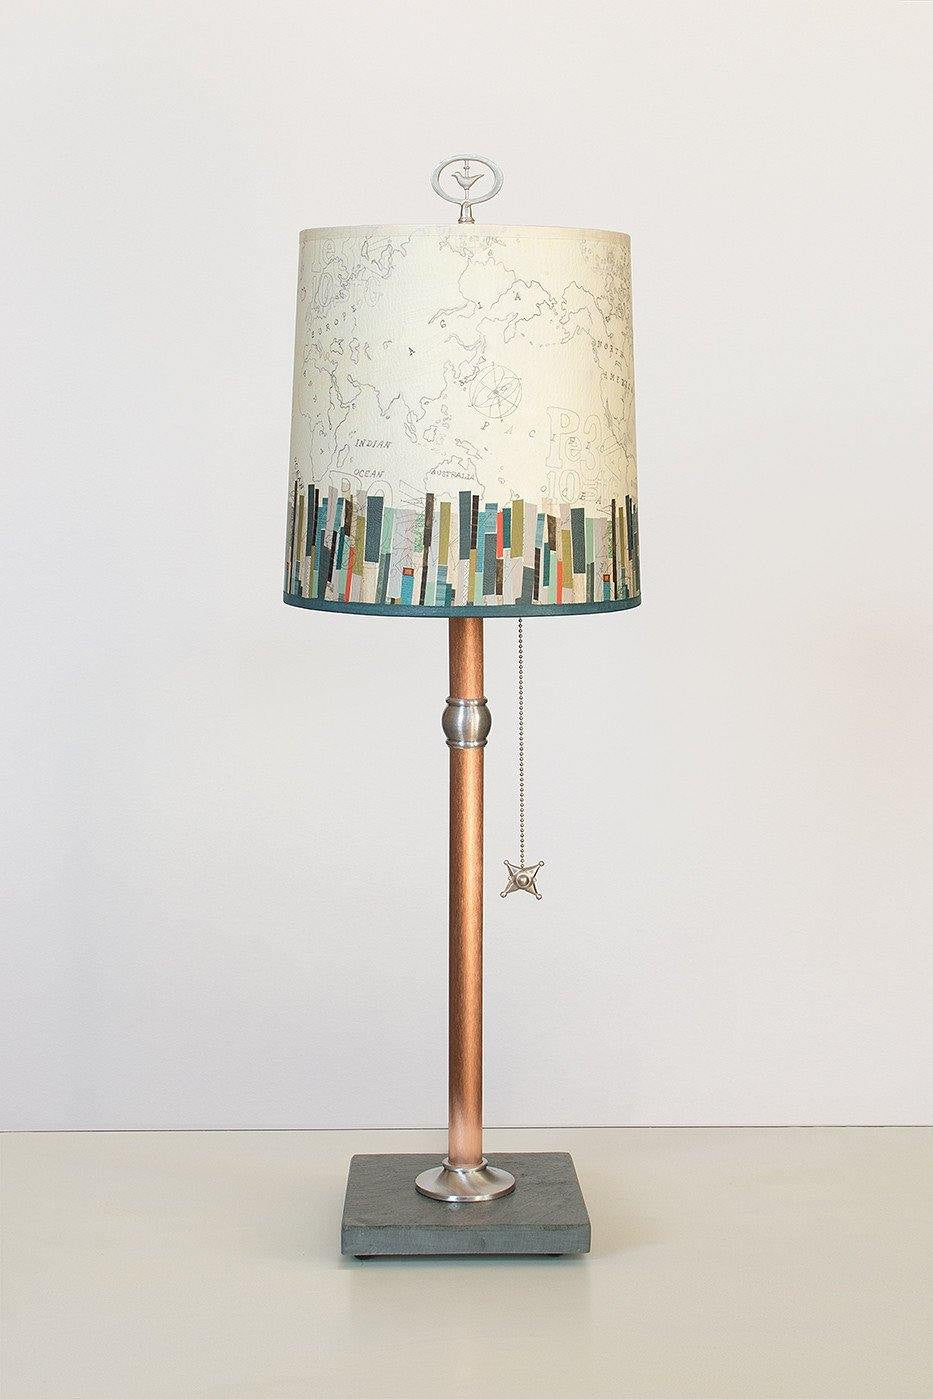 Janna Ugone & Co Table Lamps Copper Table Lamp with Medium Drum Shade in Papers Edge